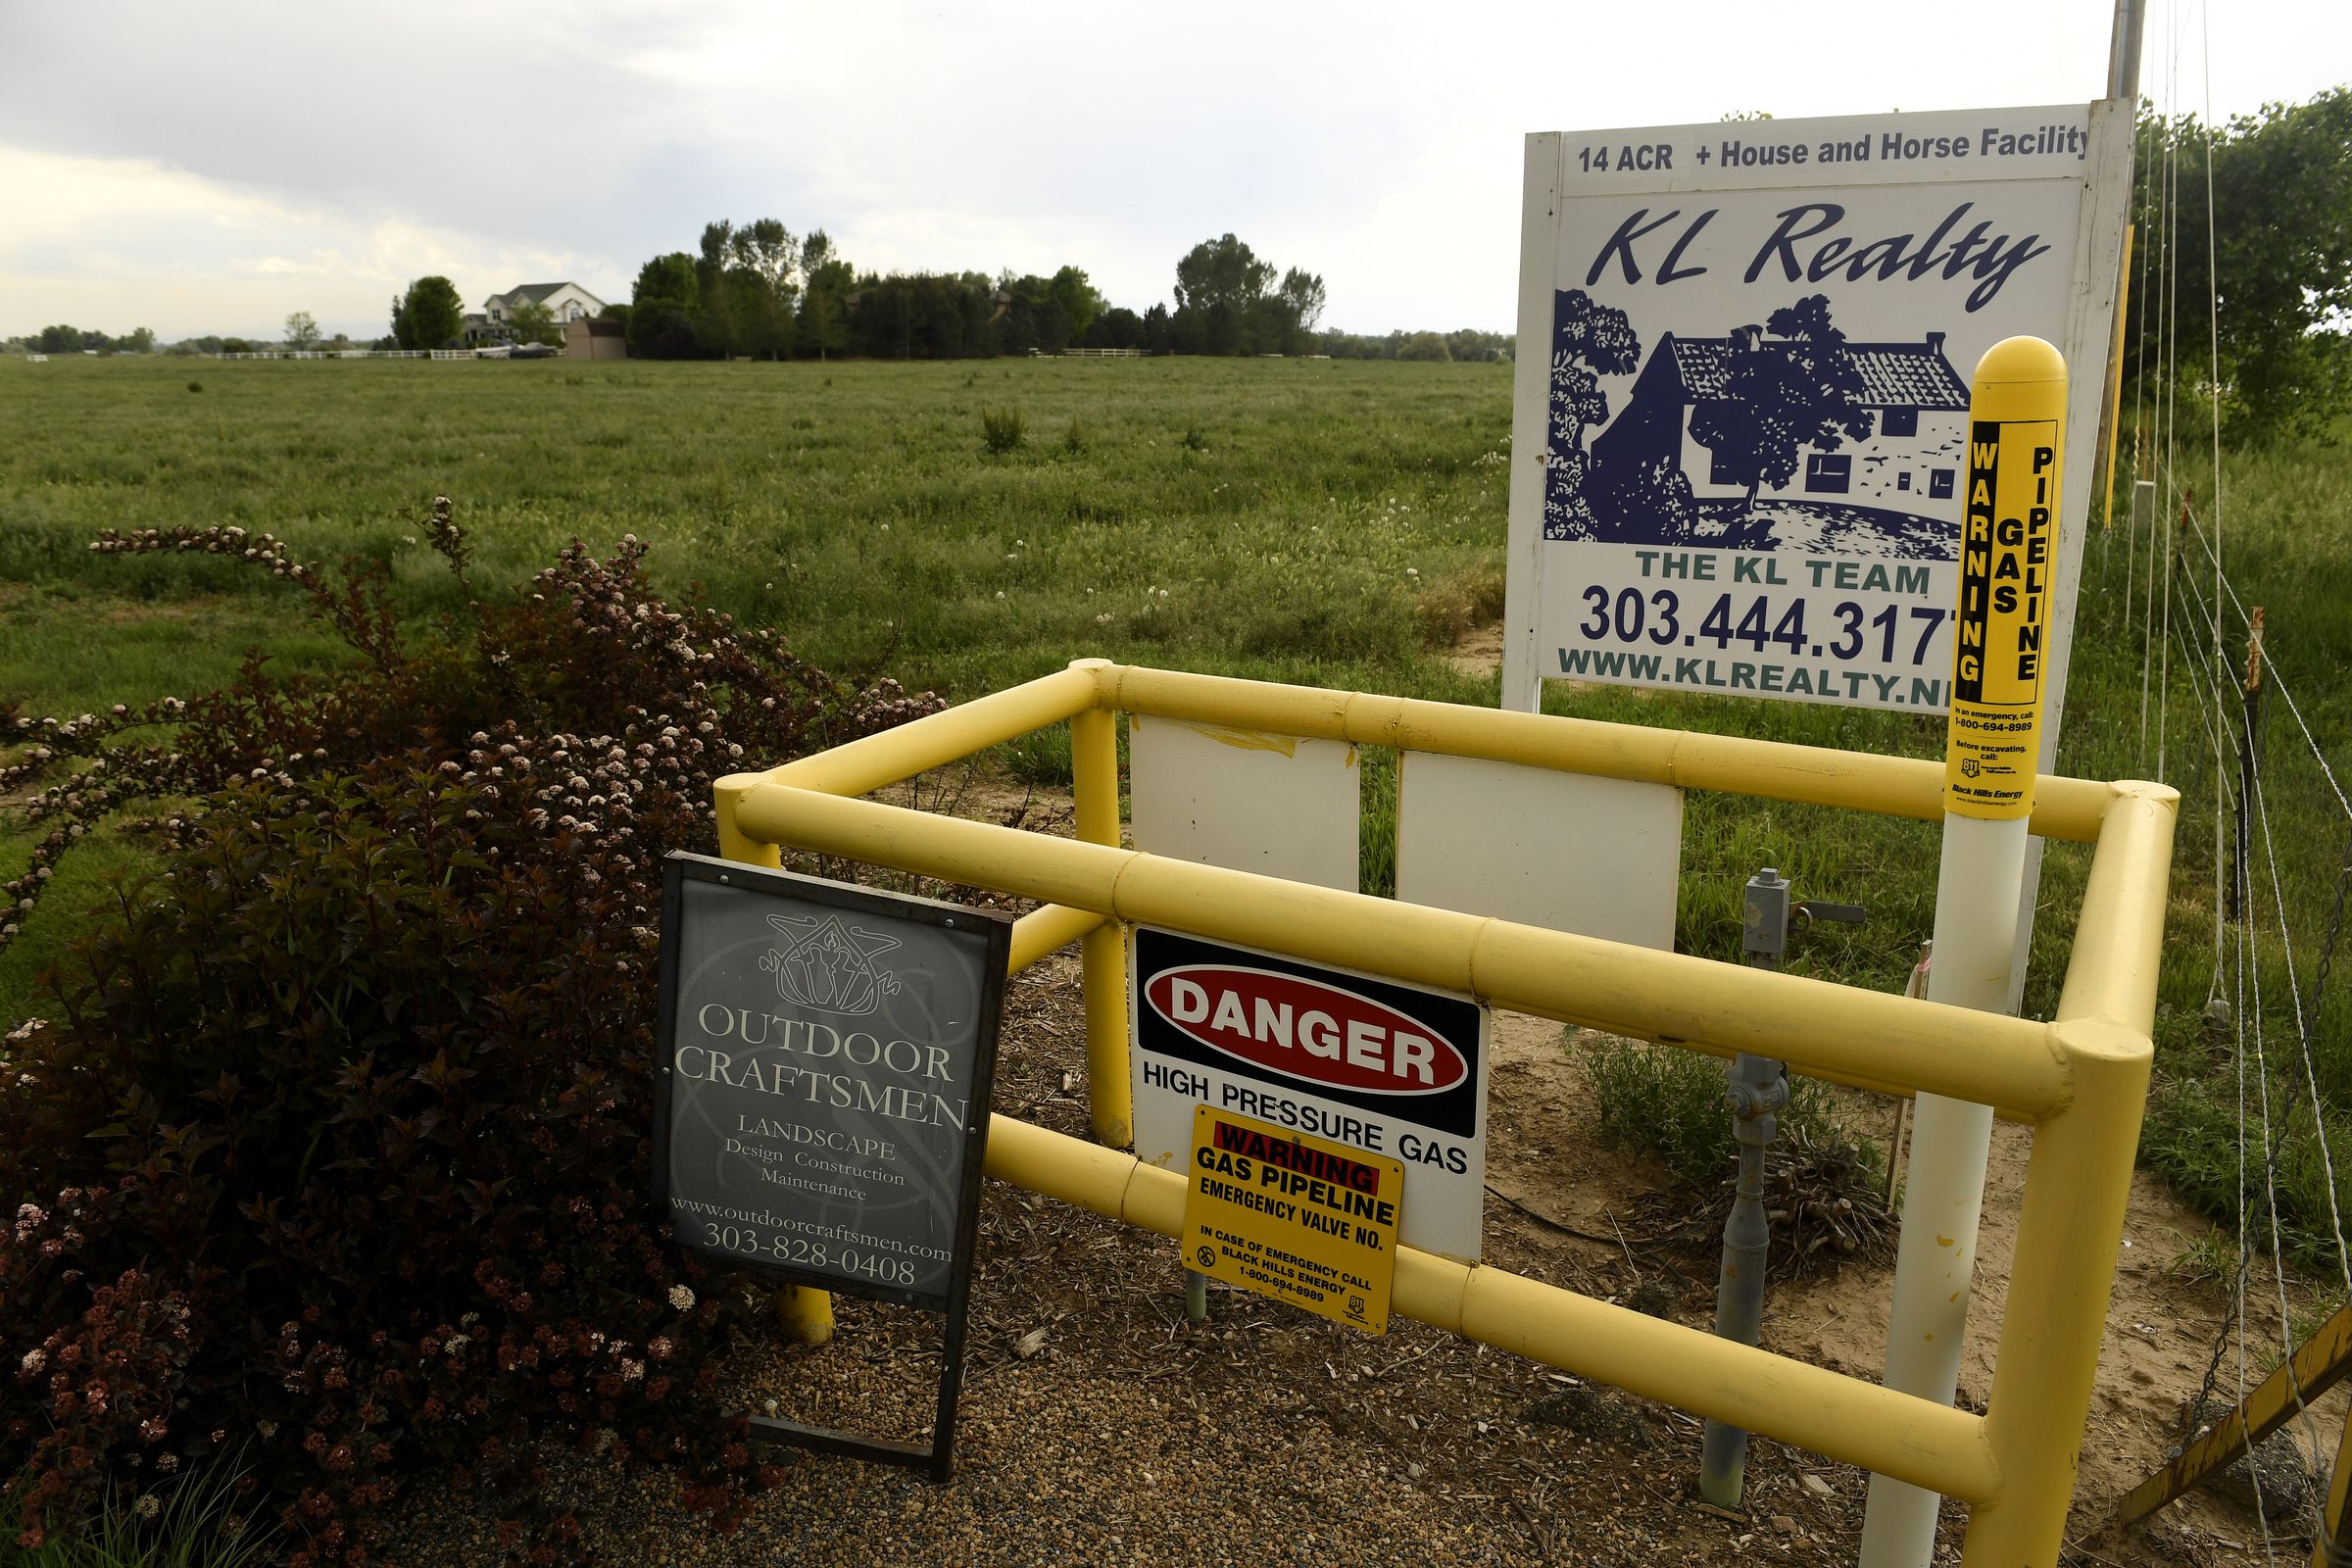 Drilling and fracking continue in Colorado coming ever closer to housing developments.